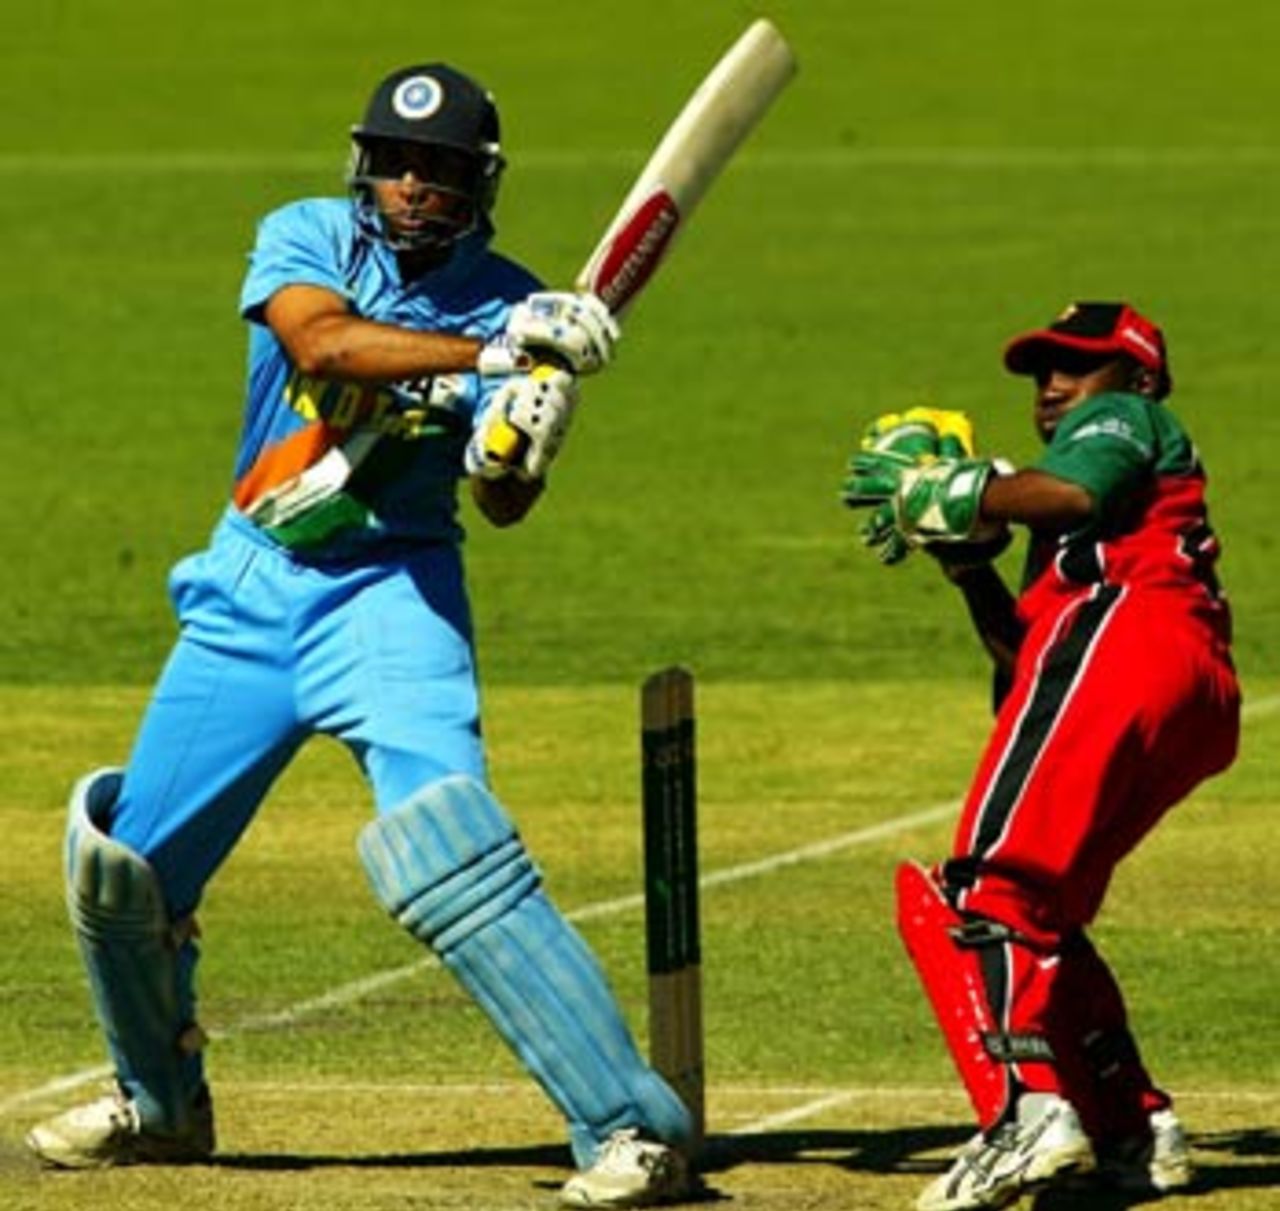 VVS Laxman unfurled a wide array of strokes and sent the Zimbabweans scurrying for cover, India v Zimbabwe, VB Series, 8th ODI, Adelaide, January 24, 2004